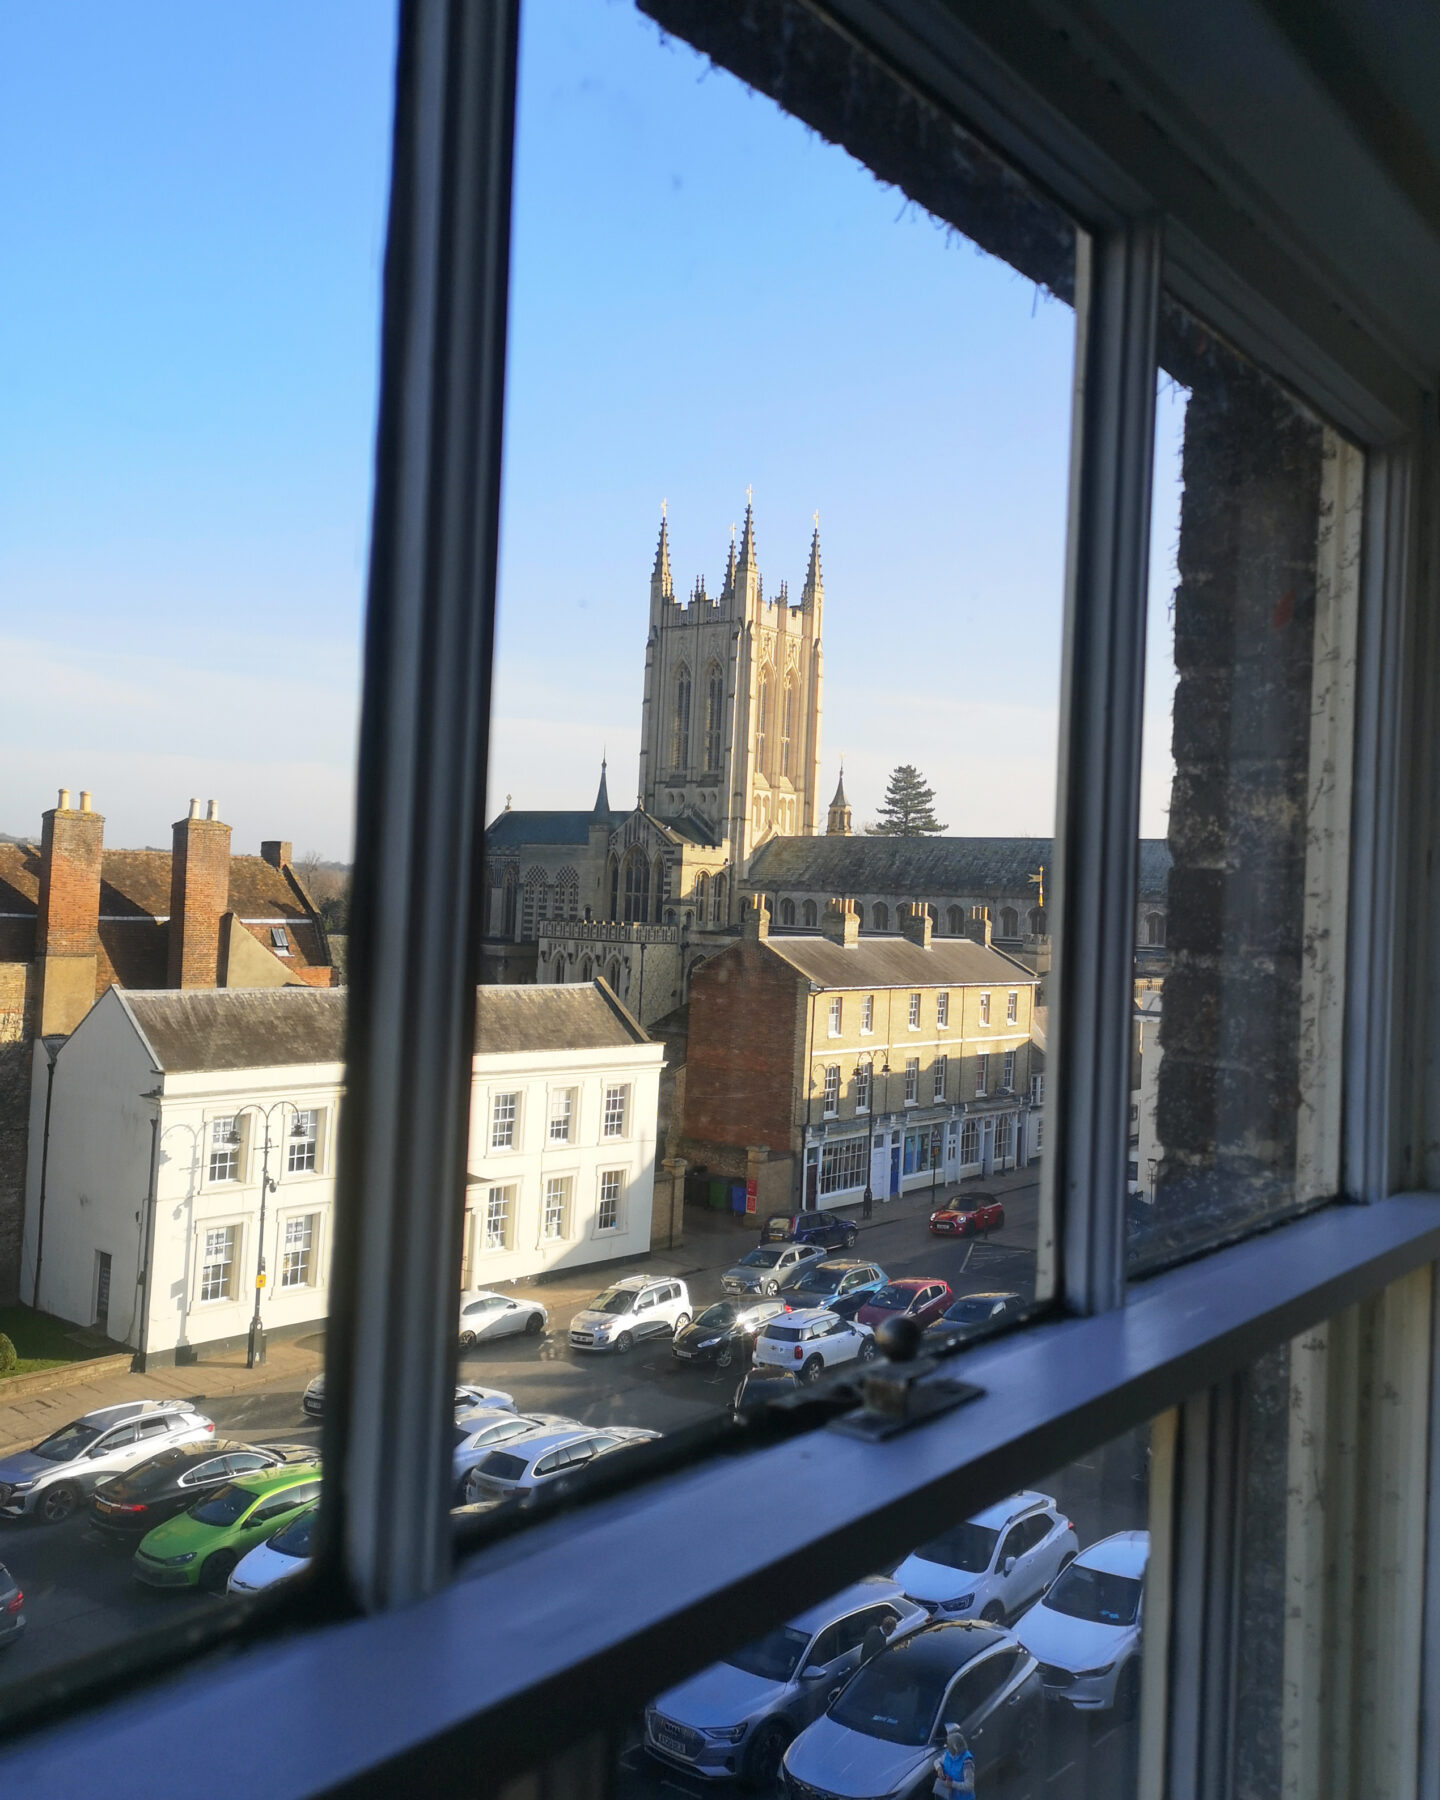 Bury St Edmunds, Visit Suffolk, Half-term, Family Fun, Visit England, East Anglia, Family Trip, Family Visit, Family-Friendly, the Frenchie Mummy, the Angel Hotel, Family Holiday, #burystedmundsandbeyond